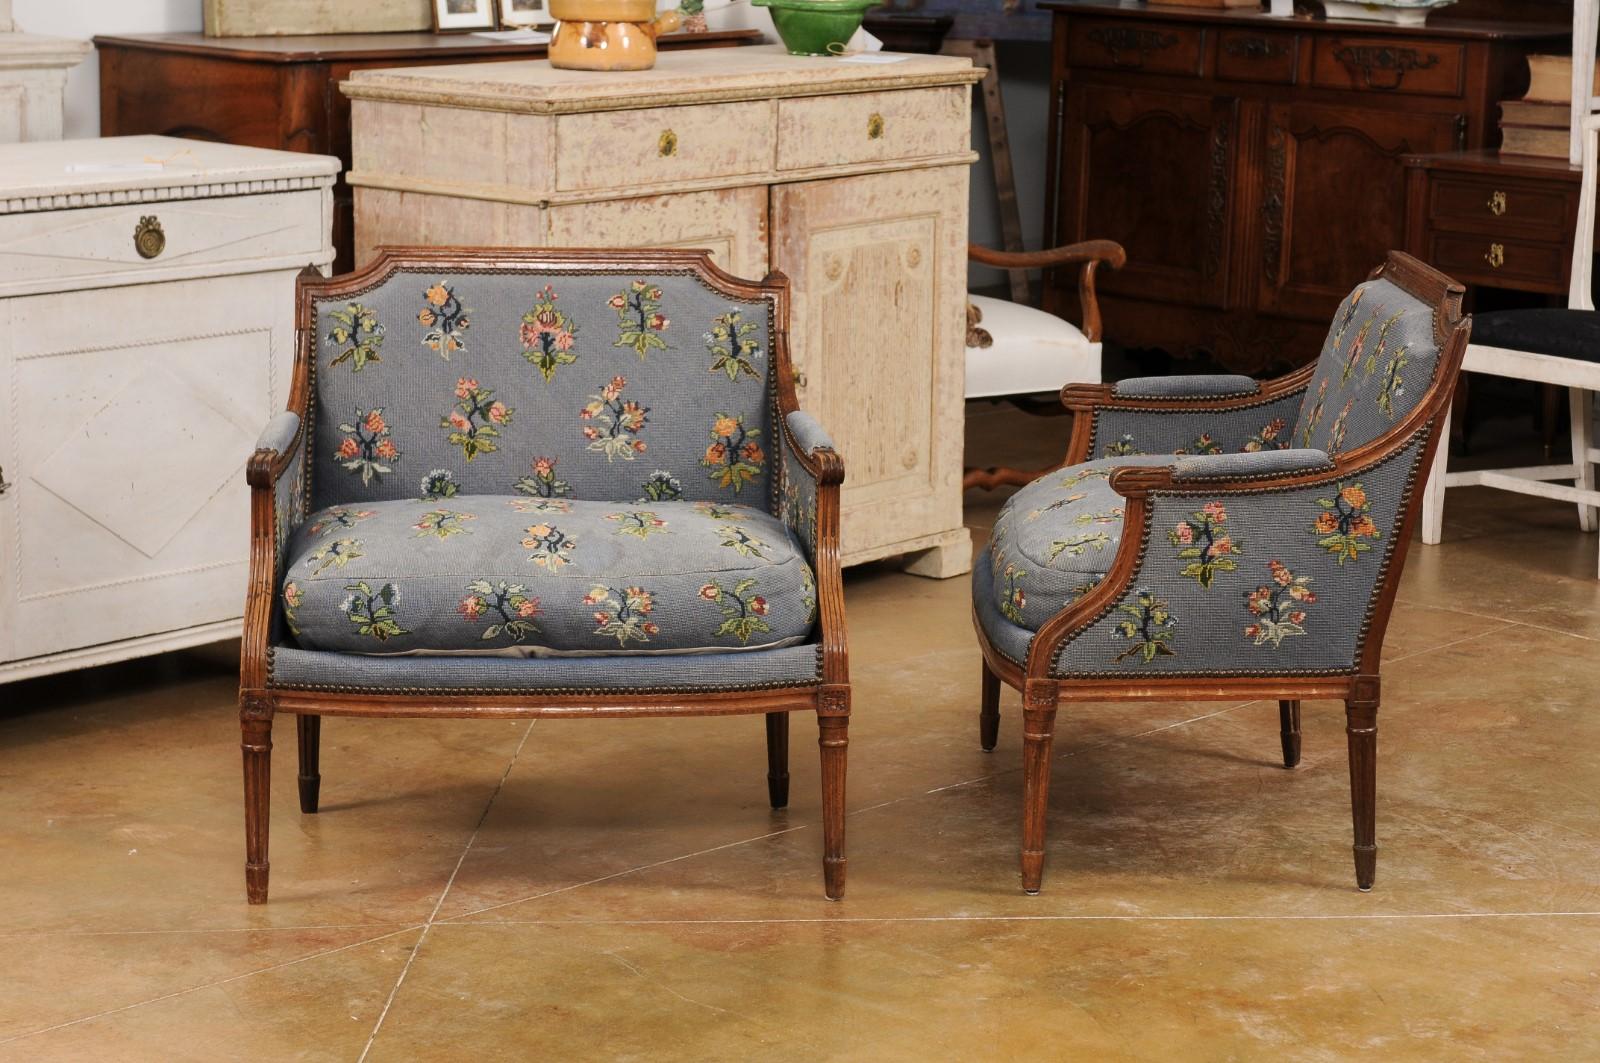 Pair of French Louis XVI Period 1790s Bergère Marquise Chairs with Upholstery For Sale 7